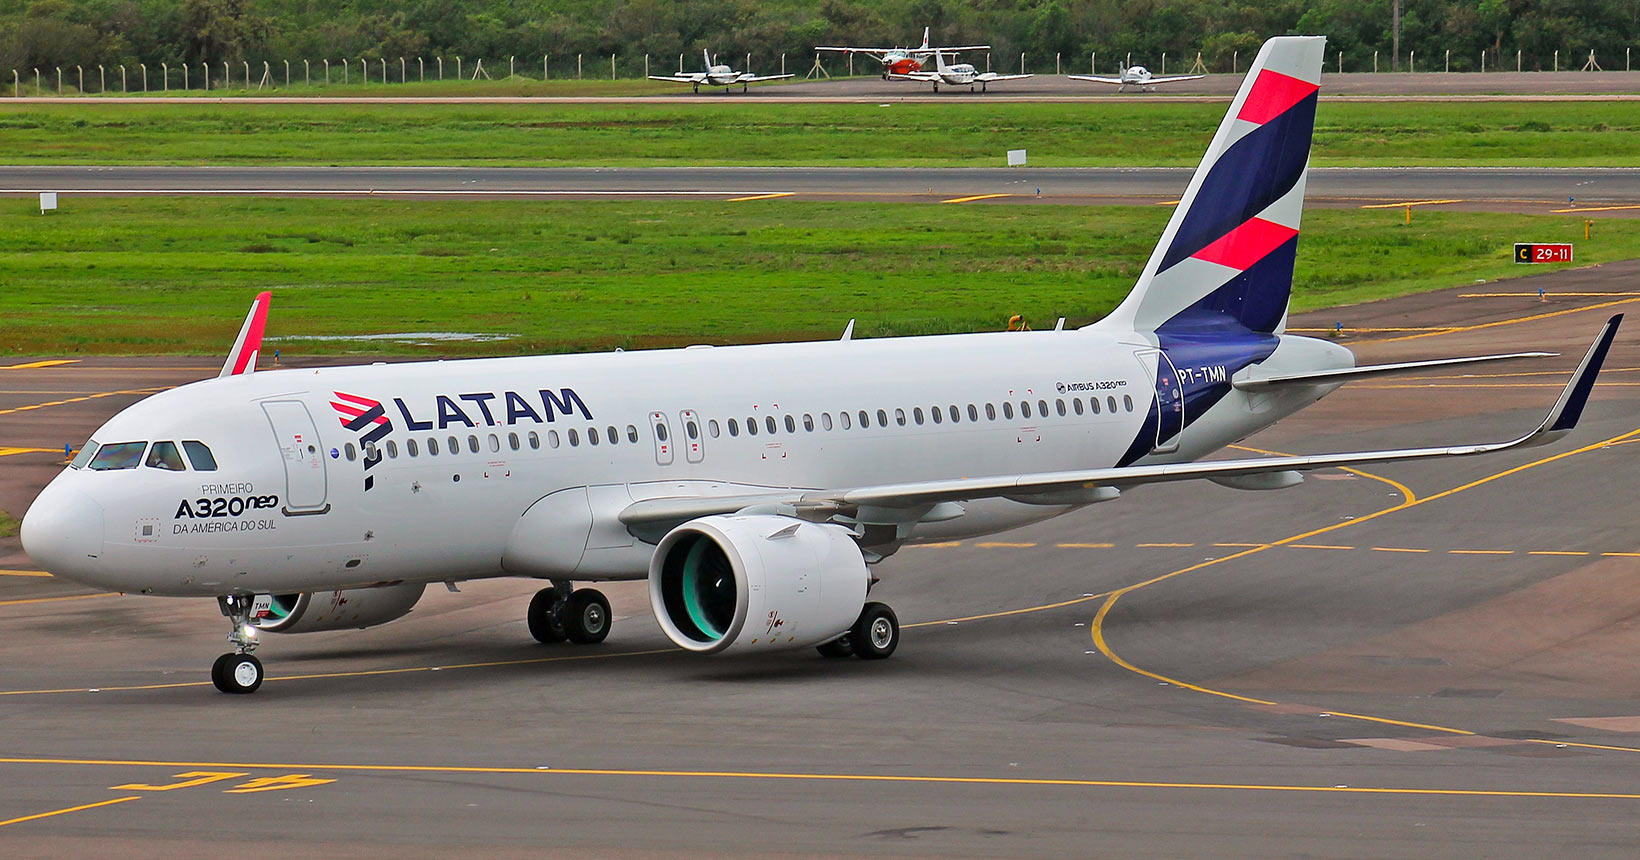 Latam, born in 2012 from the merger between Chilean Lan and Brazilian Tam, flew before the pandemic to 145 destinations in 26 countries and operated approximately 1,400 daily flights, transporting more than 74 million passengers annually.